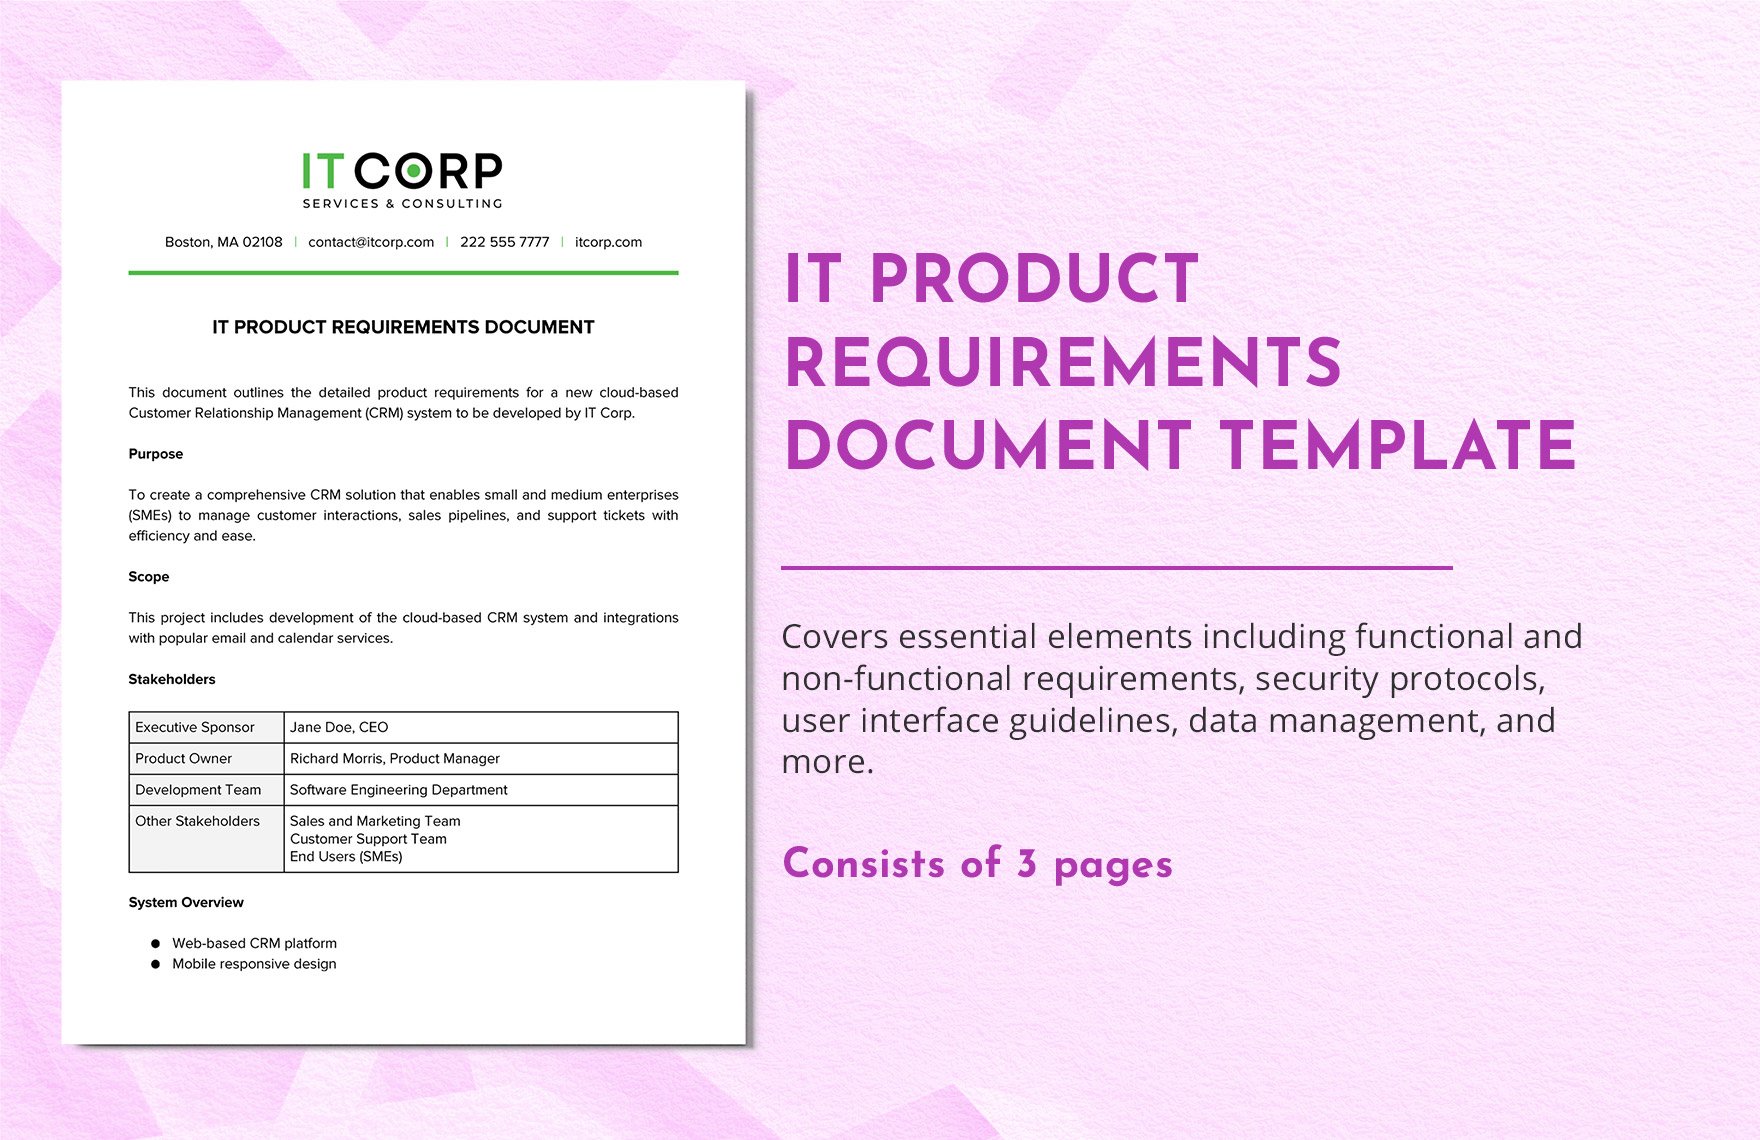 IT Product Requirements Document Template